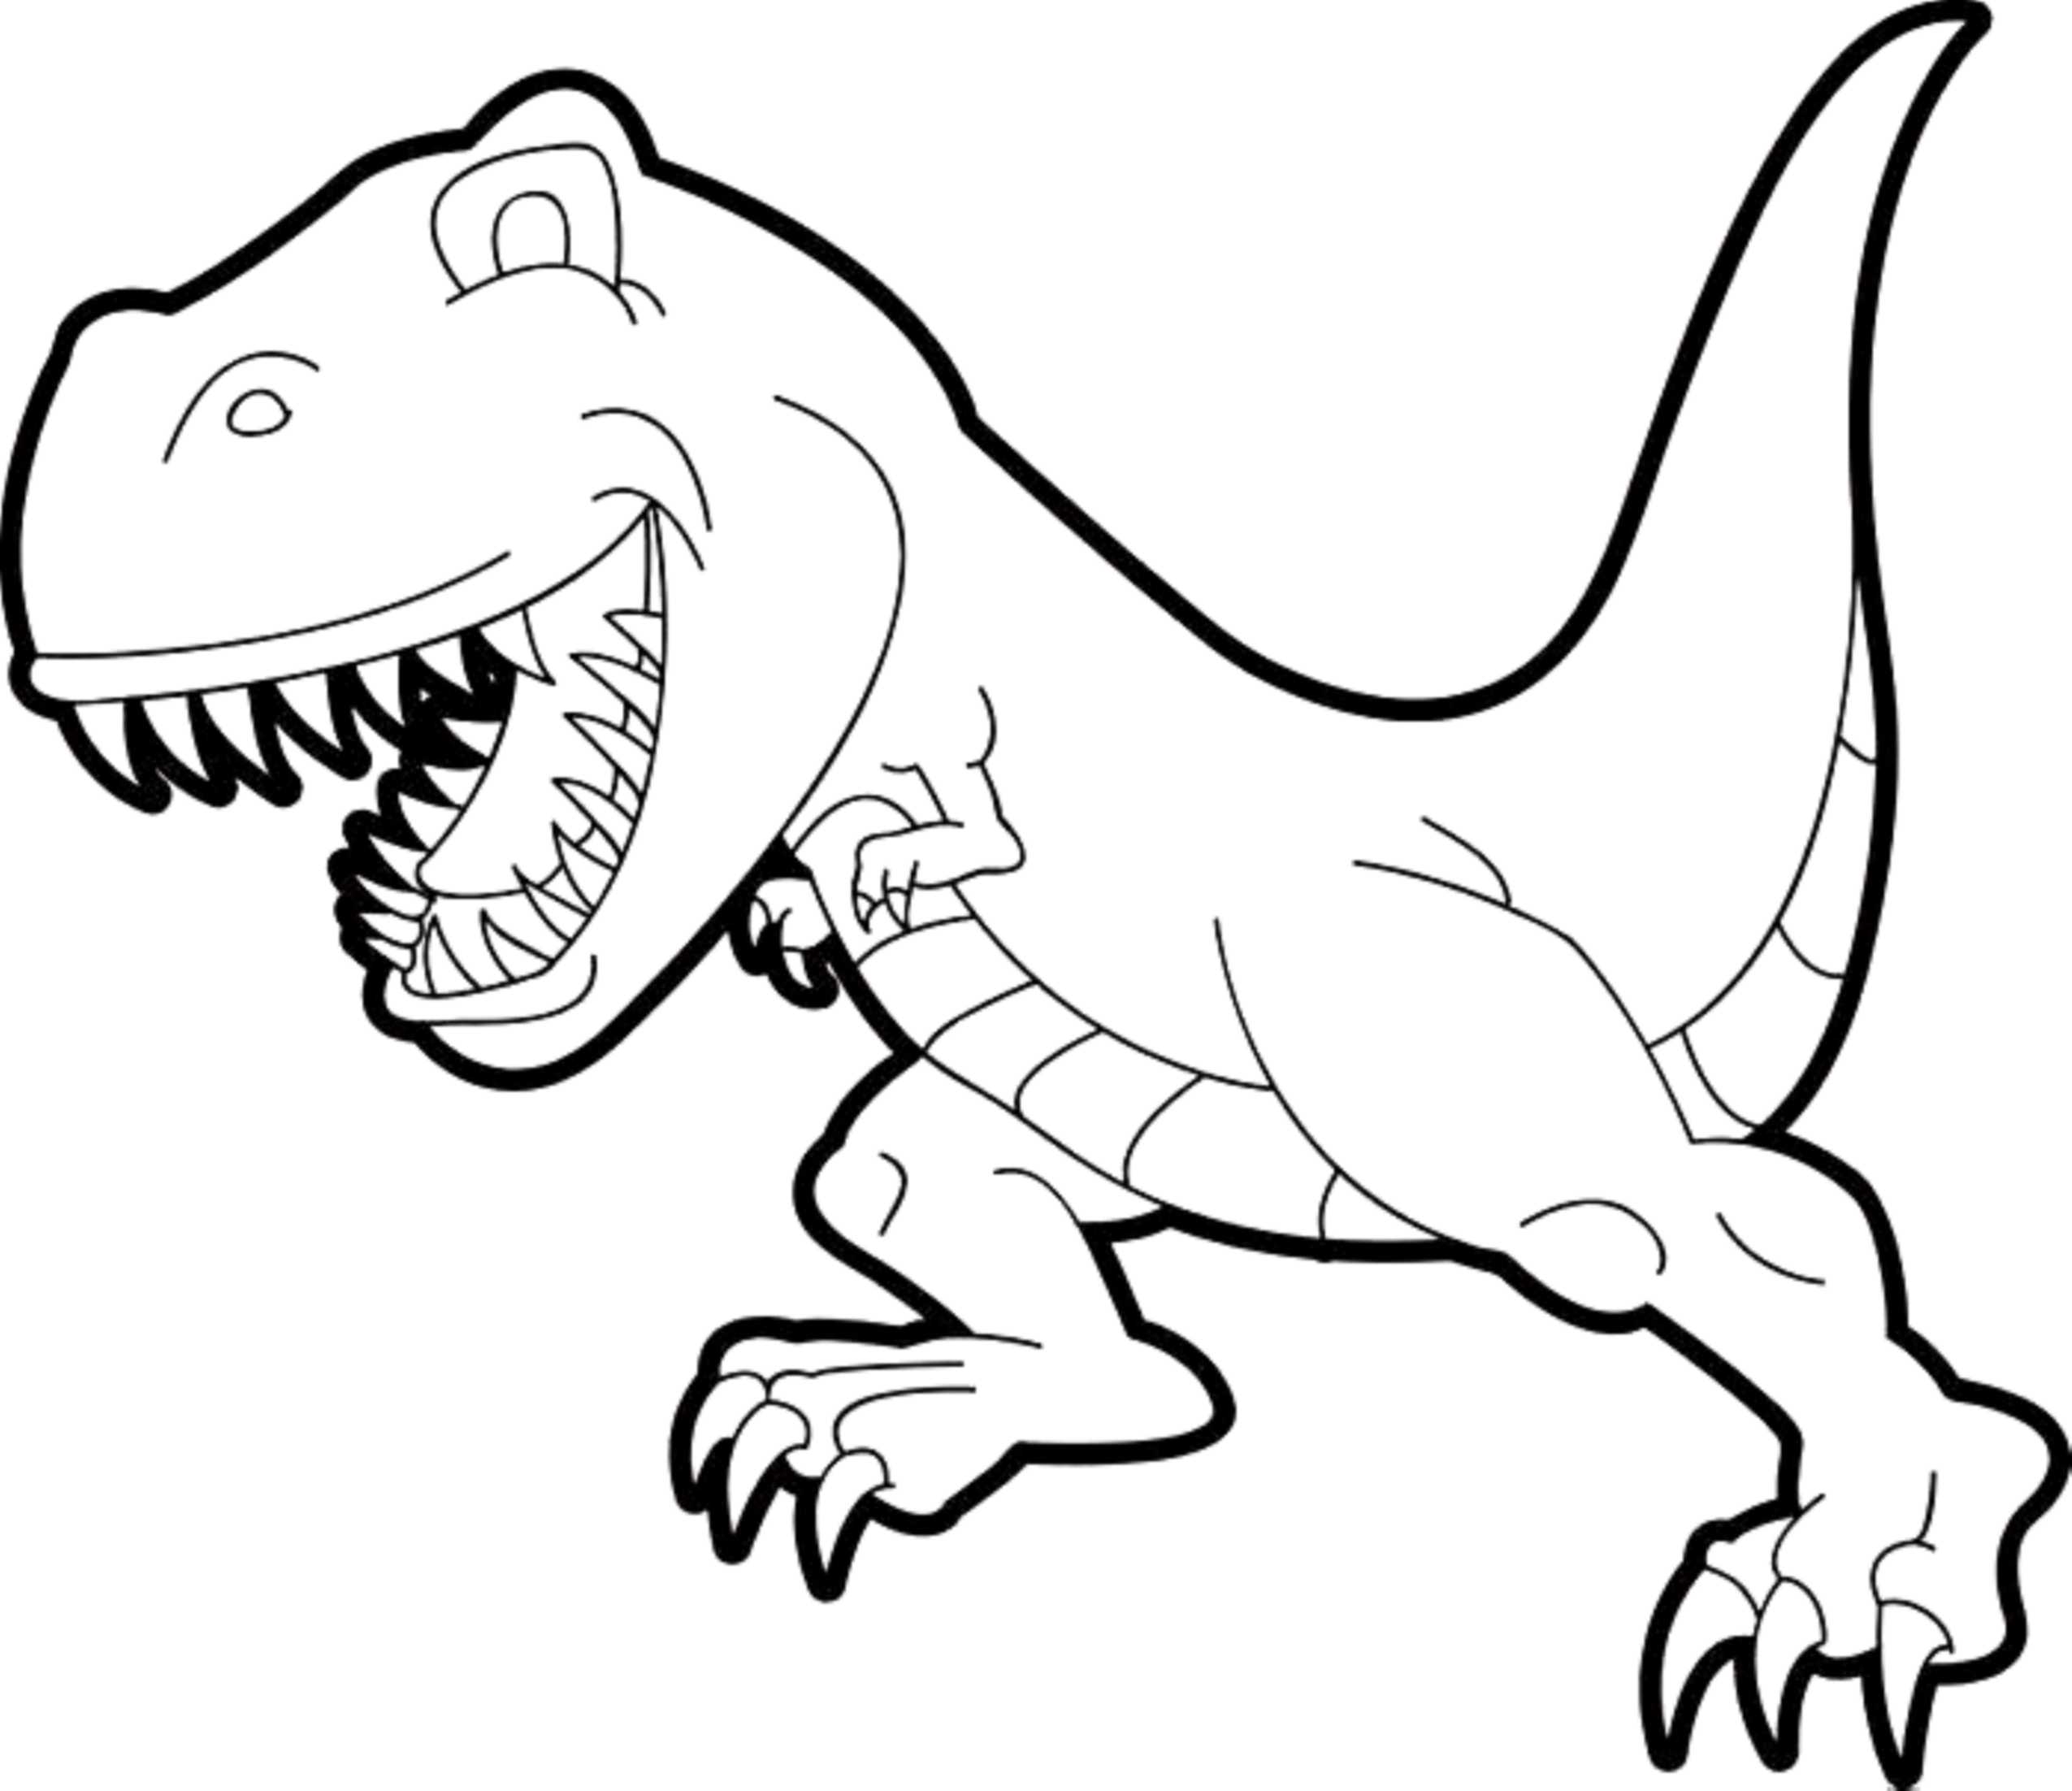 Print & Download   Dinosaur T Rex Coloring Pages for Kids